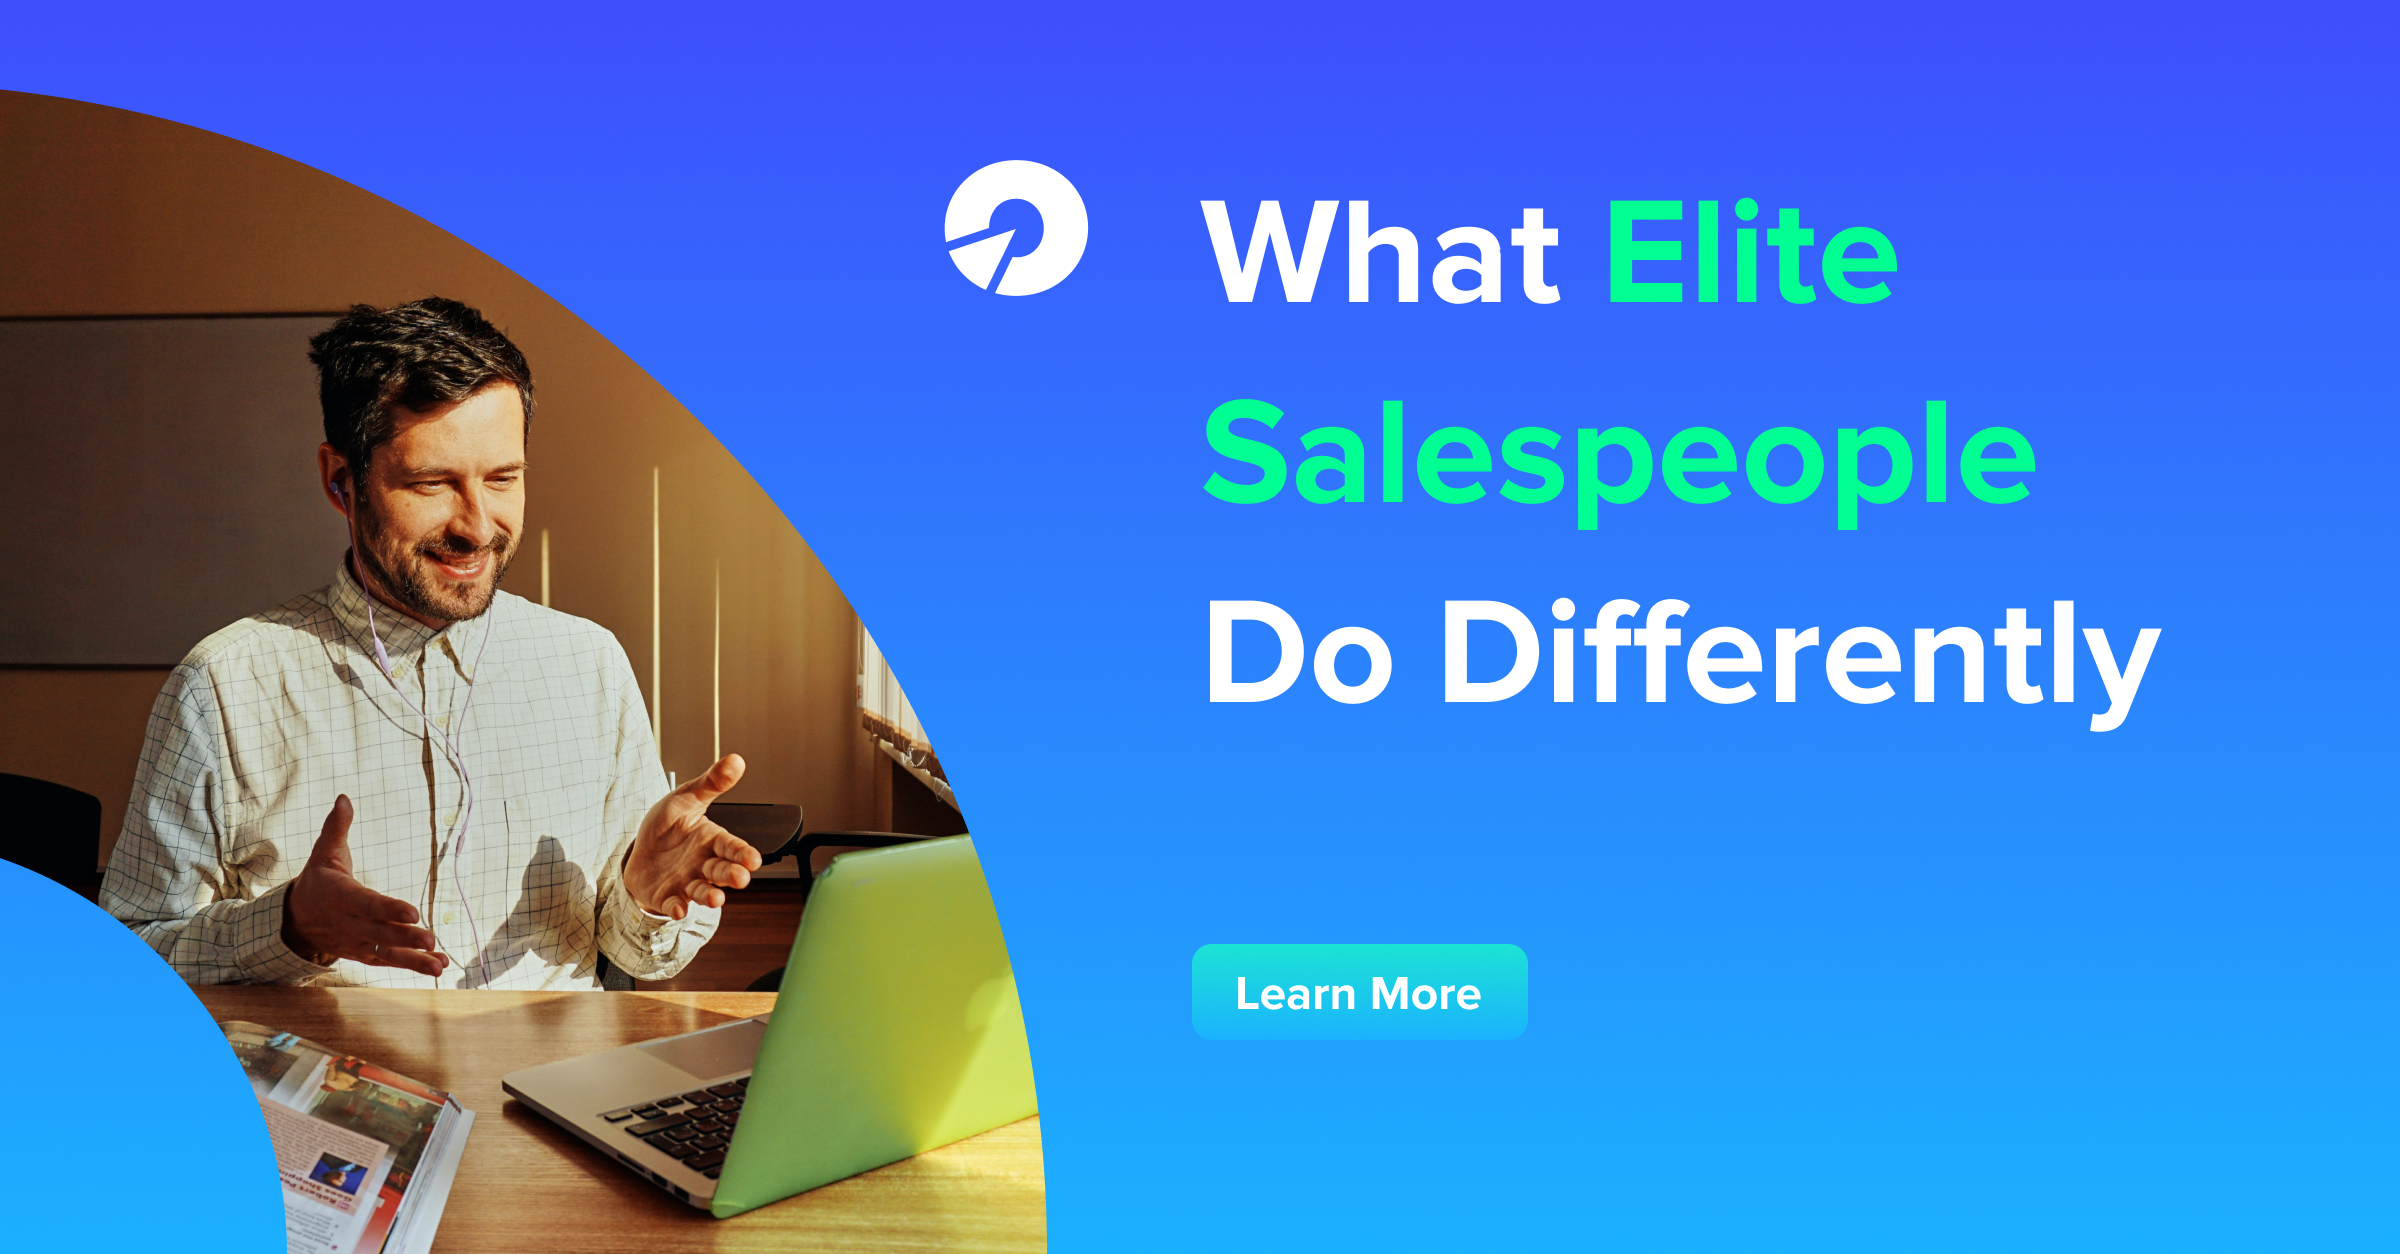 What Elite Salespeople Do Differently